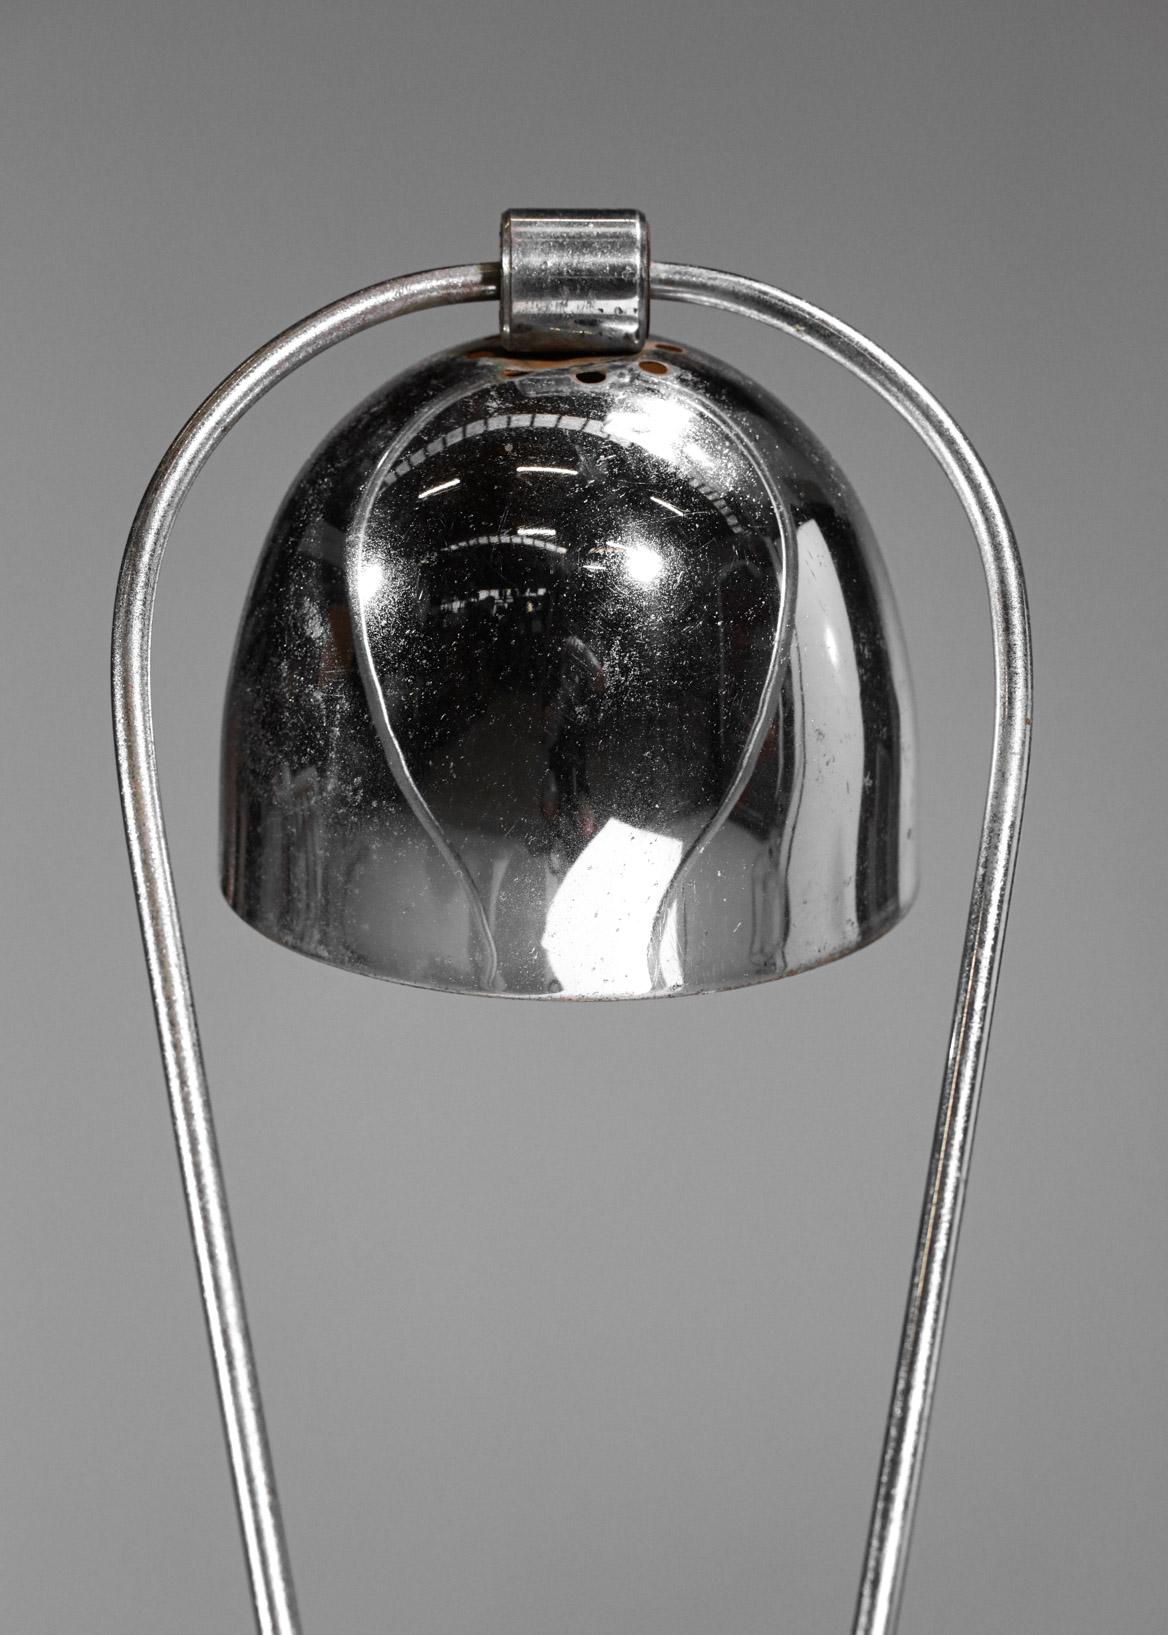 French Modernist Art Deco Chrome Table Lamp in Style of Maison Desny, 1950 F397 For Sale 2